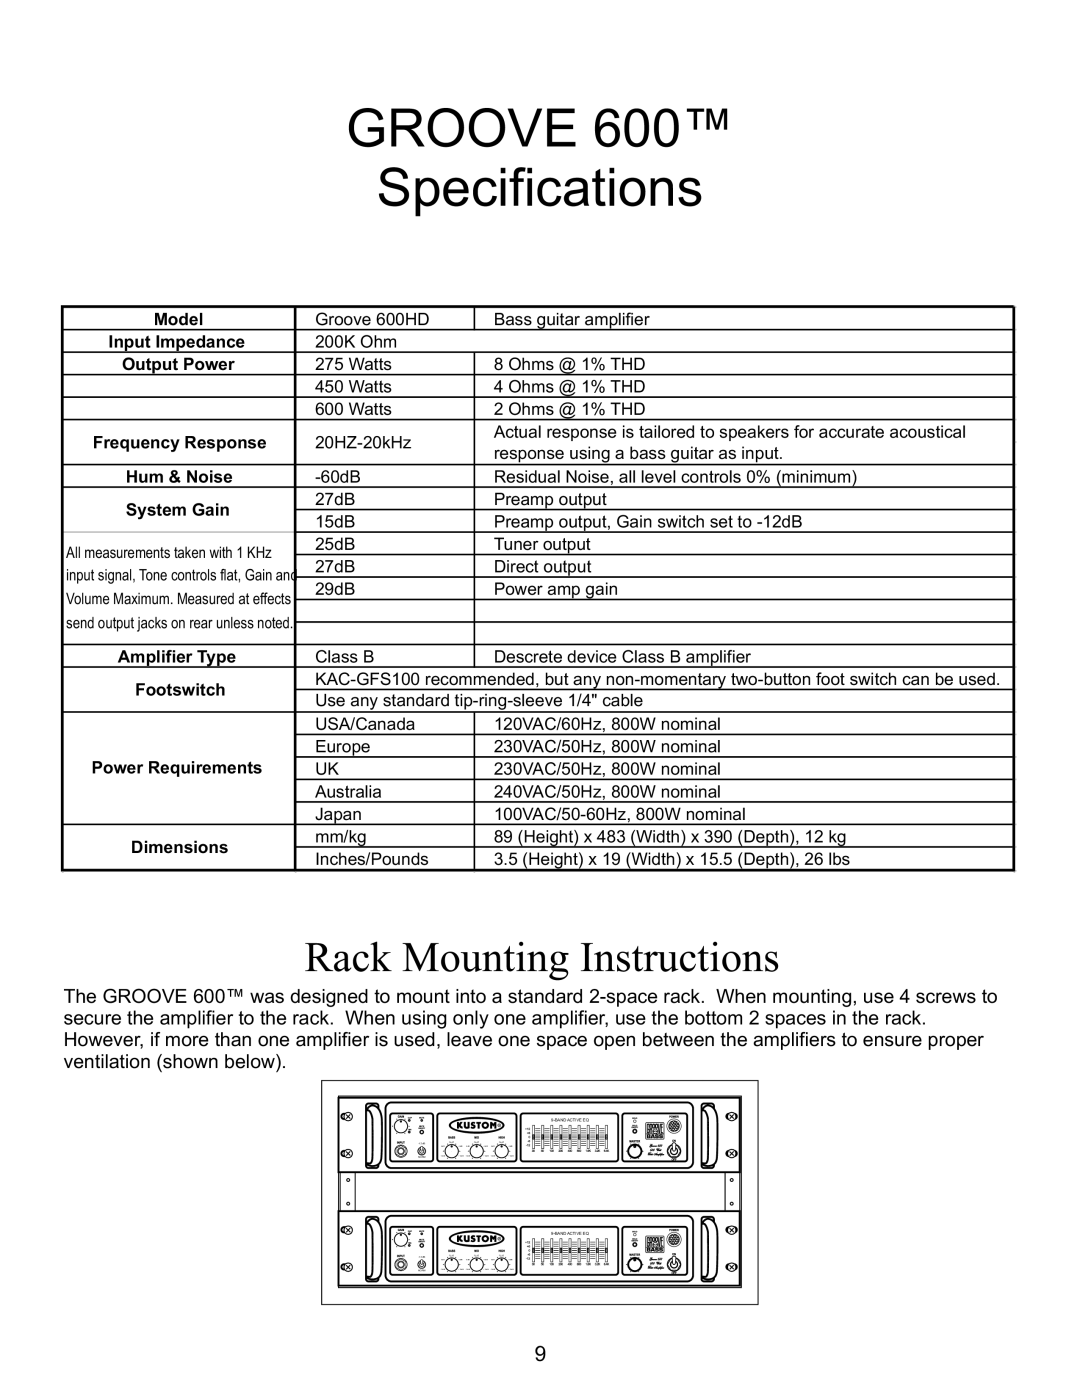 Kustom GROOVE 600TM Rack Mounting Instructions, GROOVE Specifications, Model Input Impedance Output Power, Dimensions 